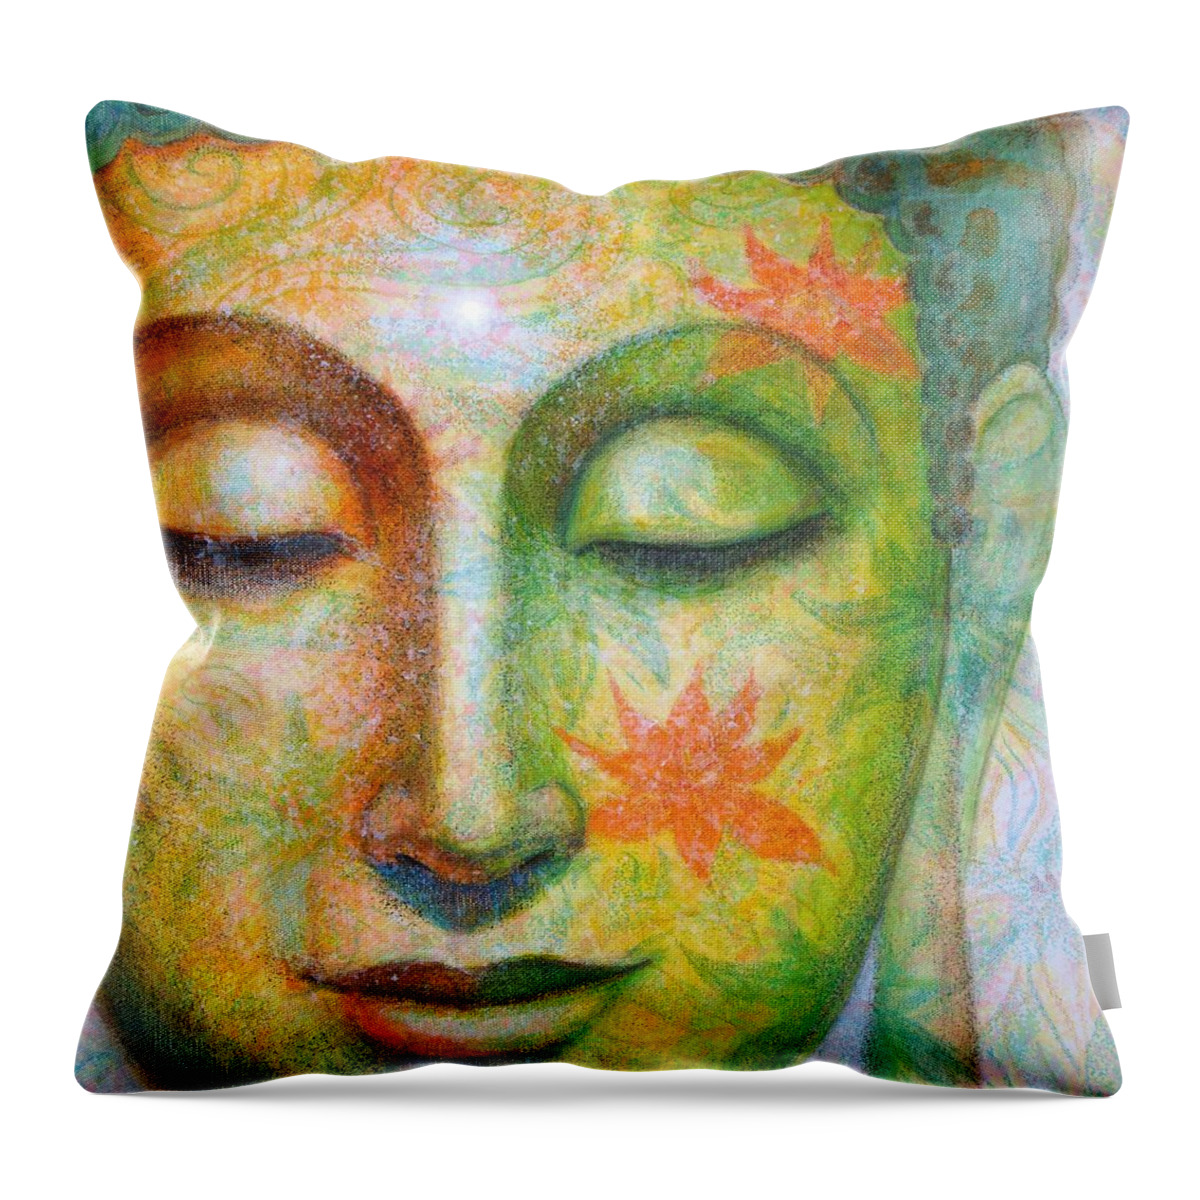 Buddha Throw Pillow featuring the painting Lotus Meditation Buddha by Sue Halstenberg